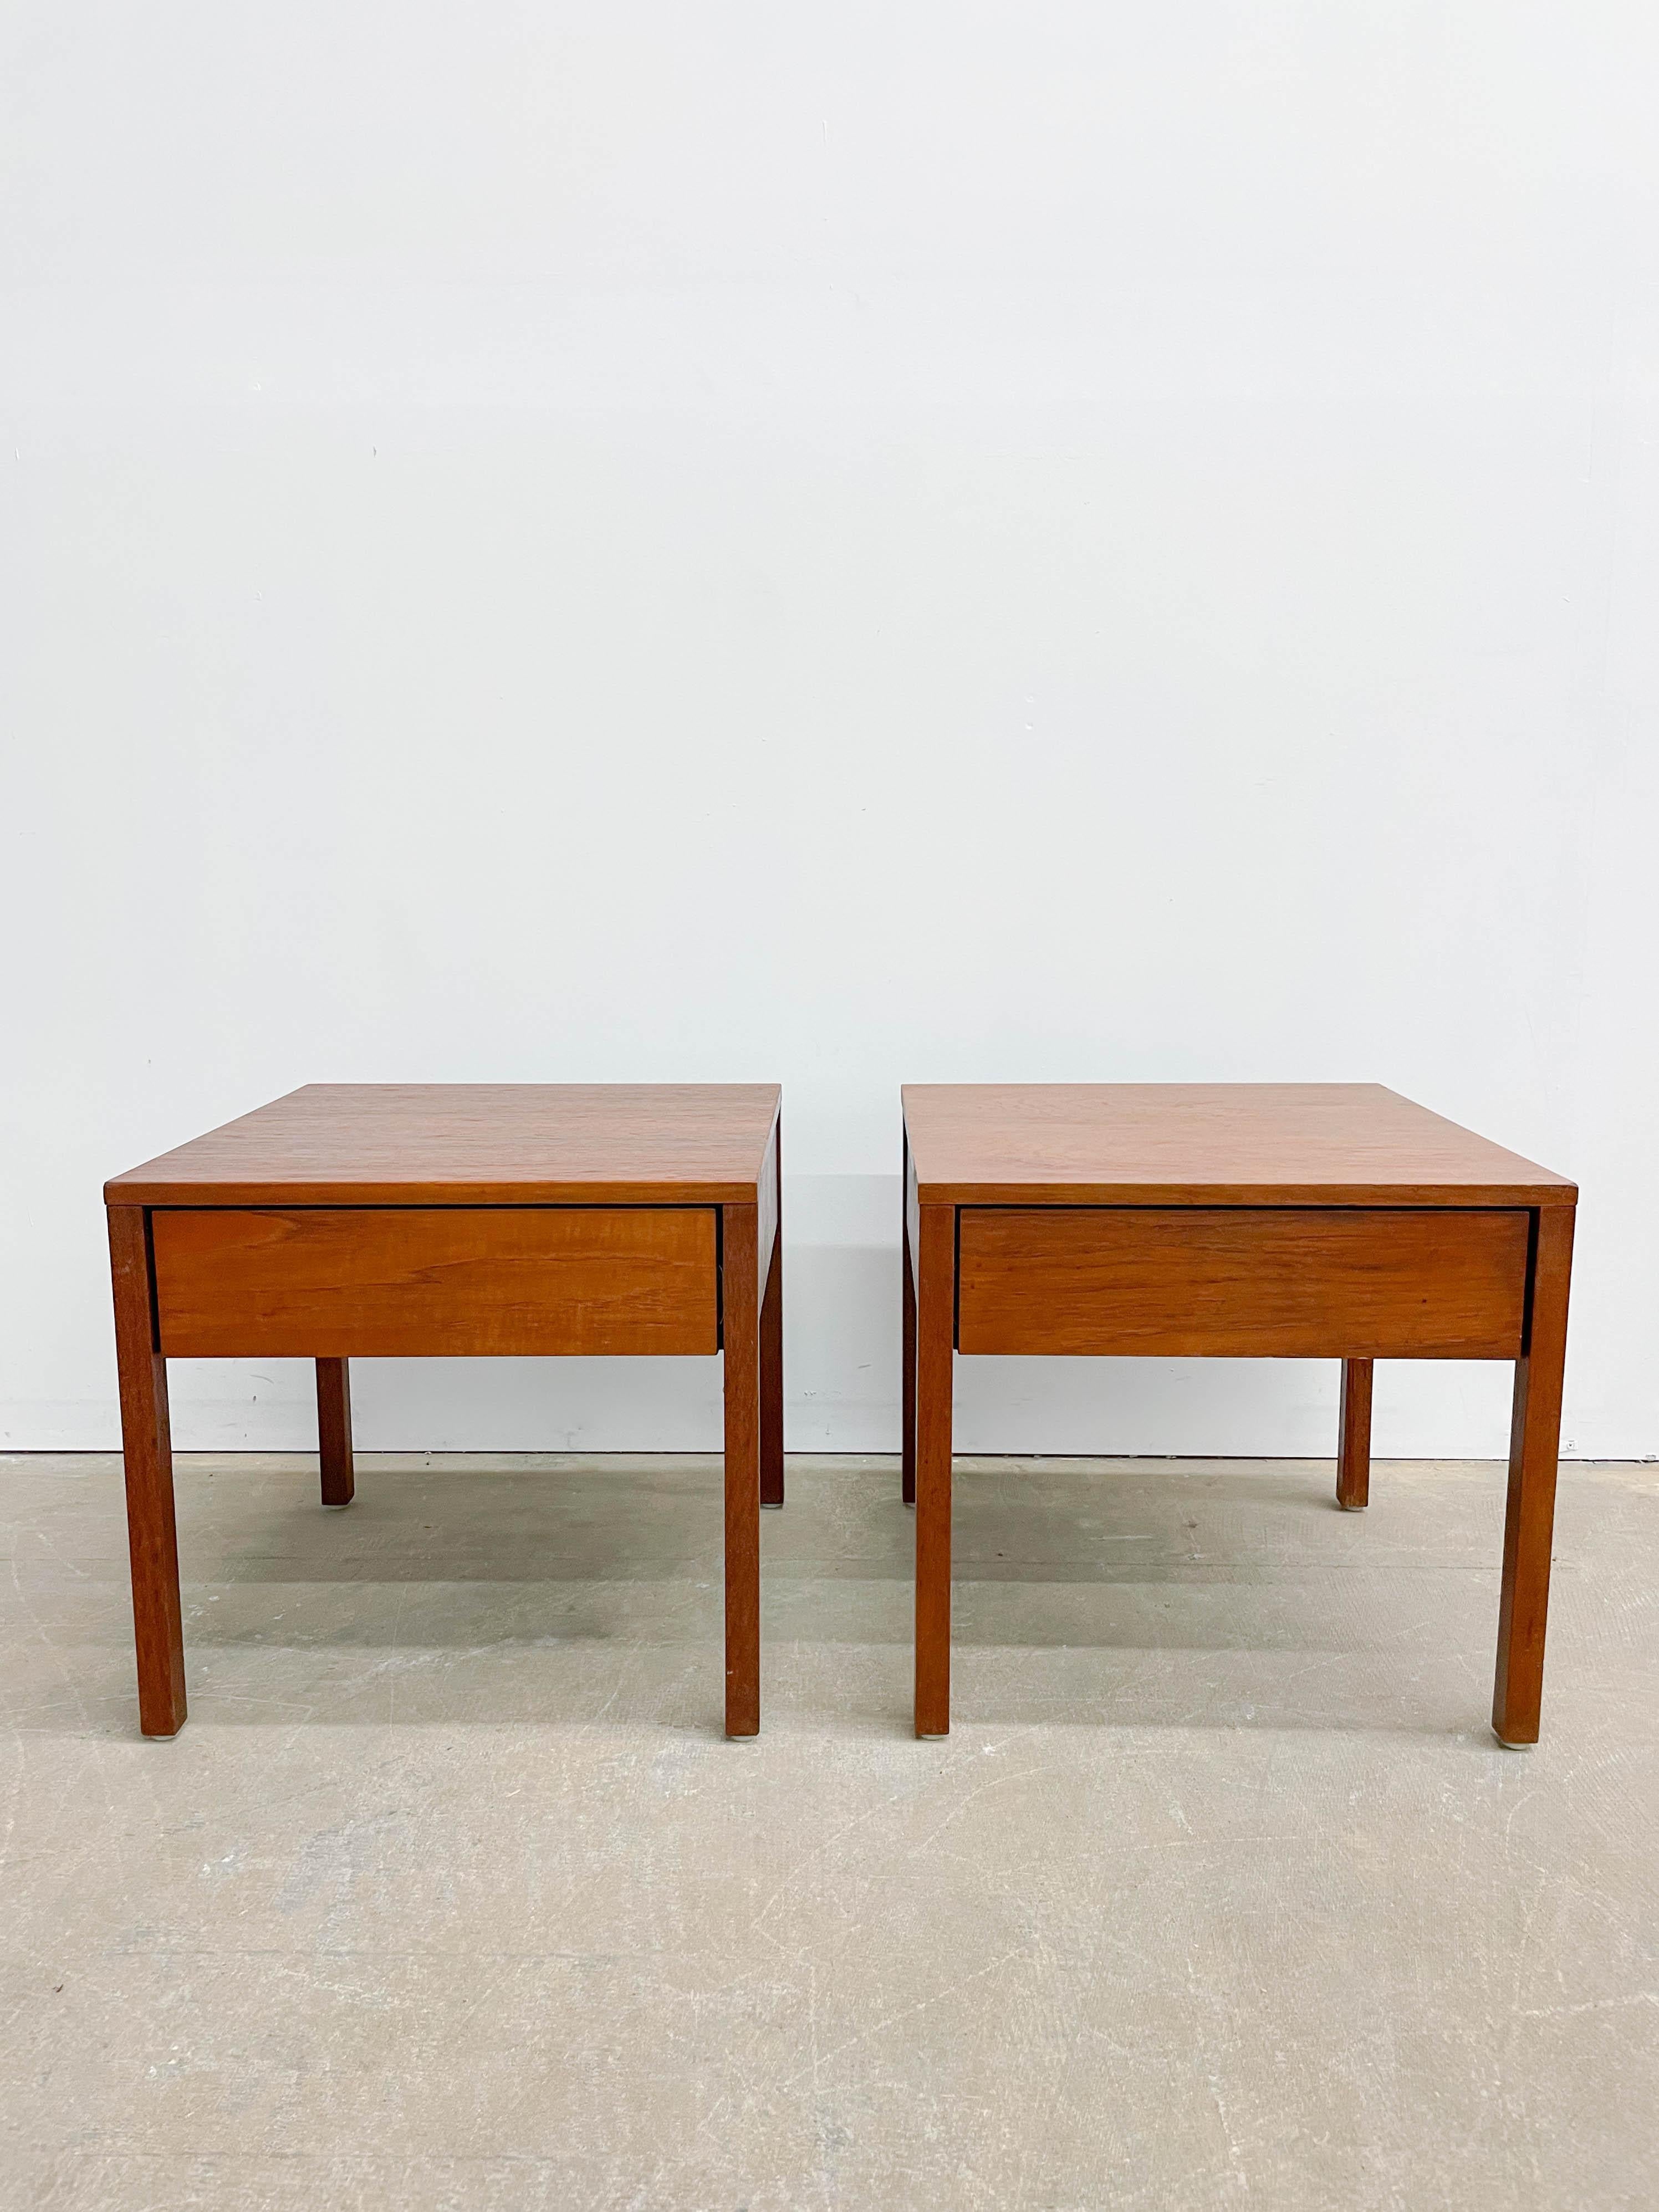 This is a perfect example of classic Florence Knoll restrained modern design -- effortlessly pairing beauty with functionality. These Knoll night stands were designed in the 1950s and produced by Knoll Associates. Each offers beautiful teak veneer